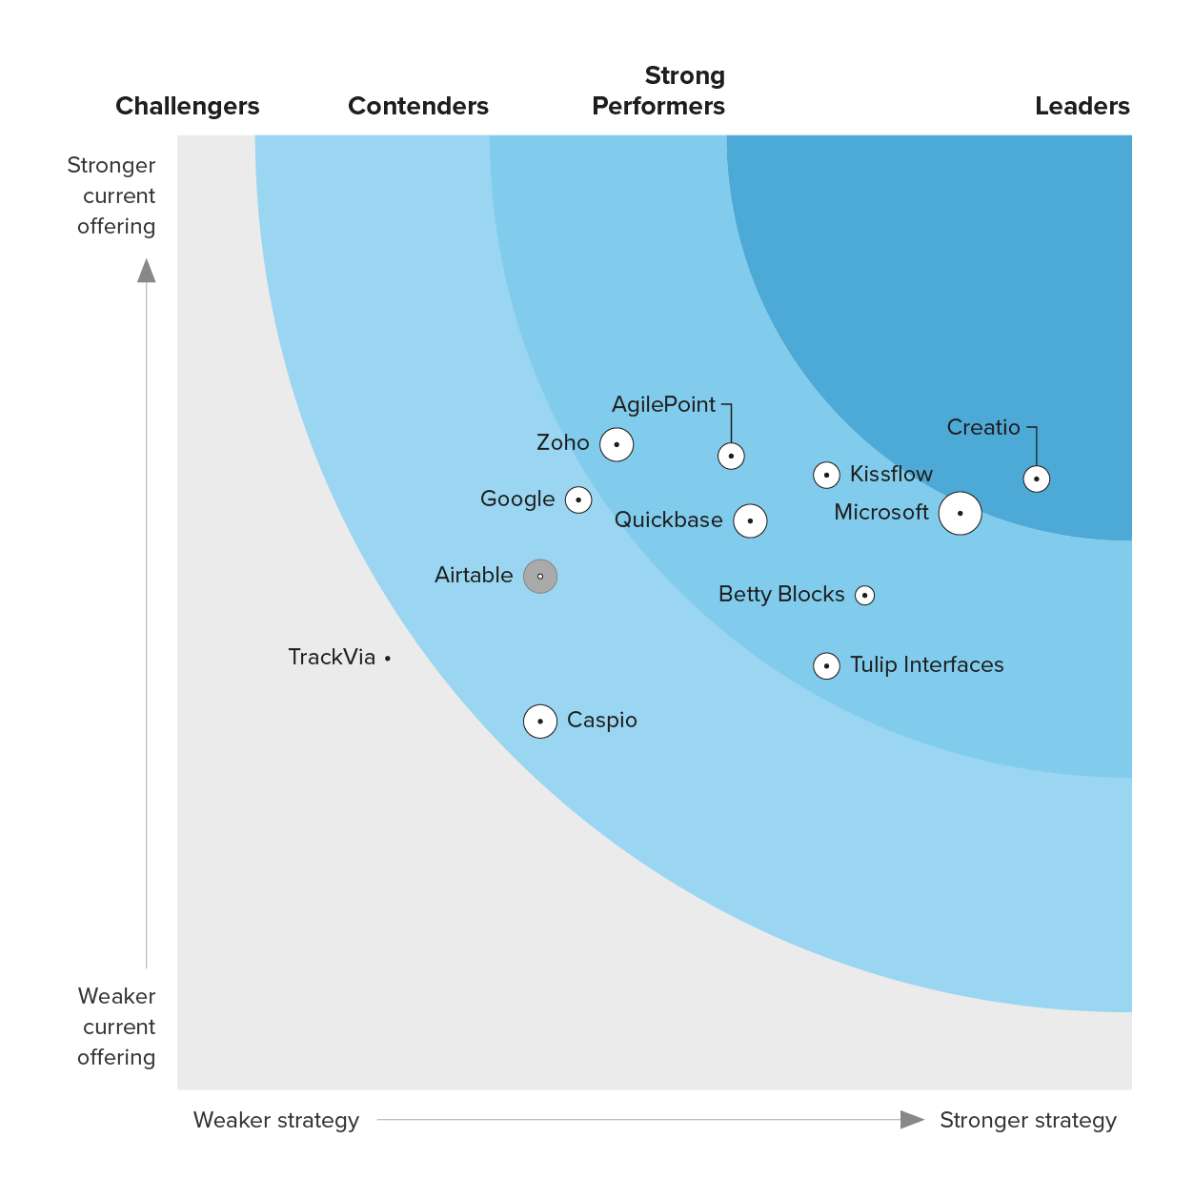 Creatio leader in The Forrester Wave™: Low-Code Platforms For Citizen Developers, Q1 2024